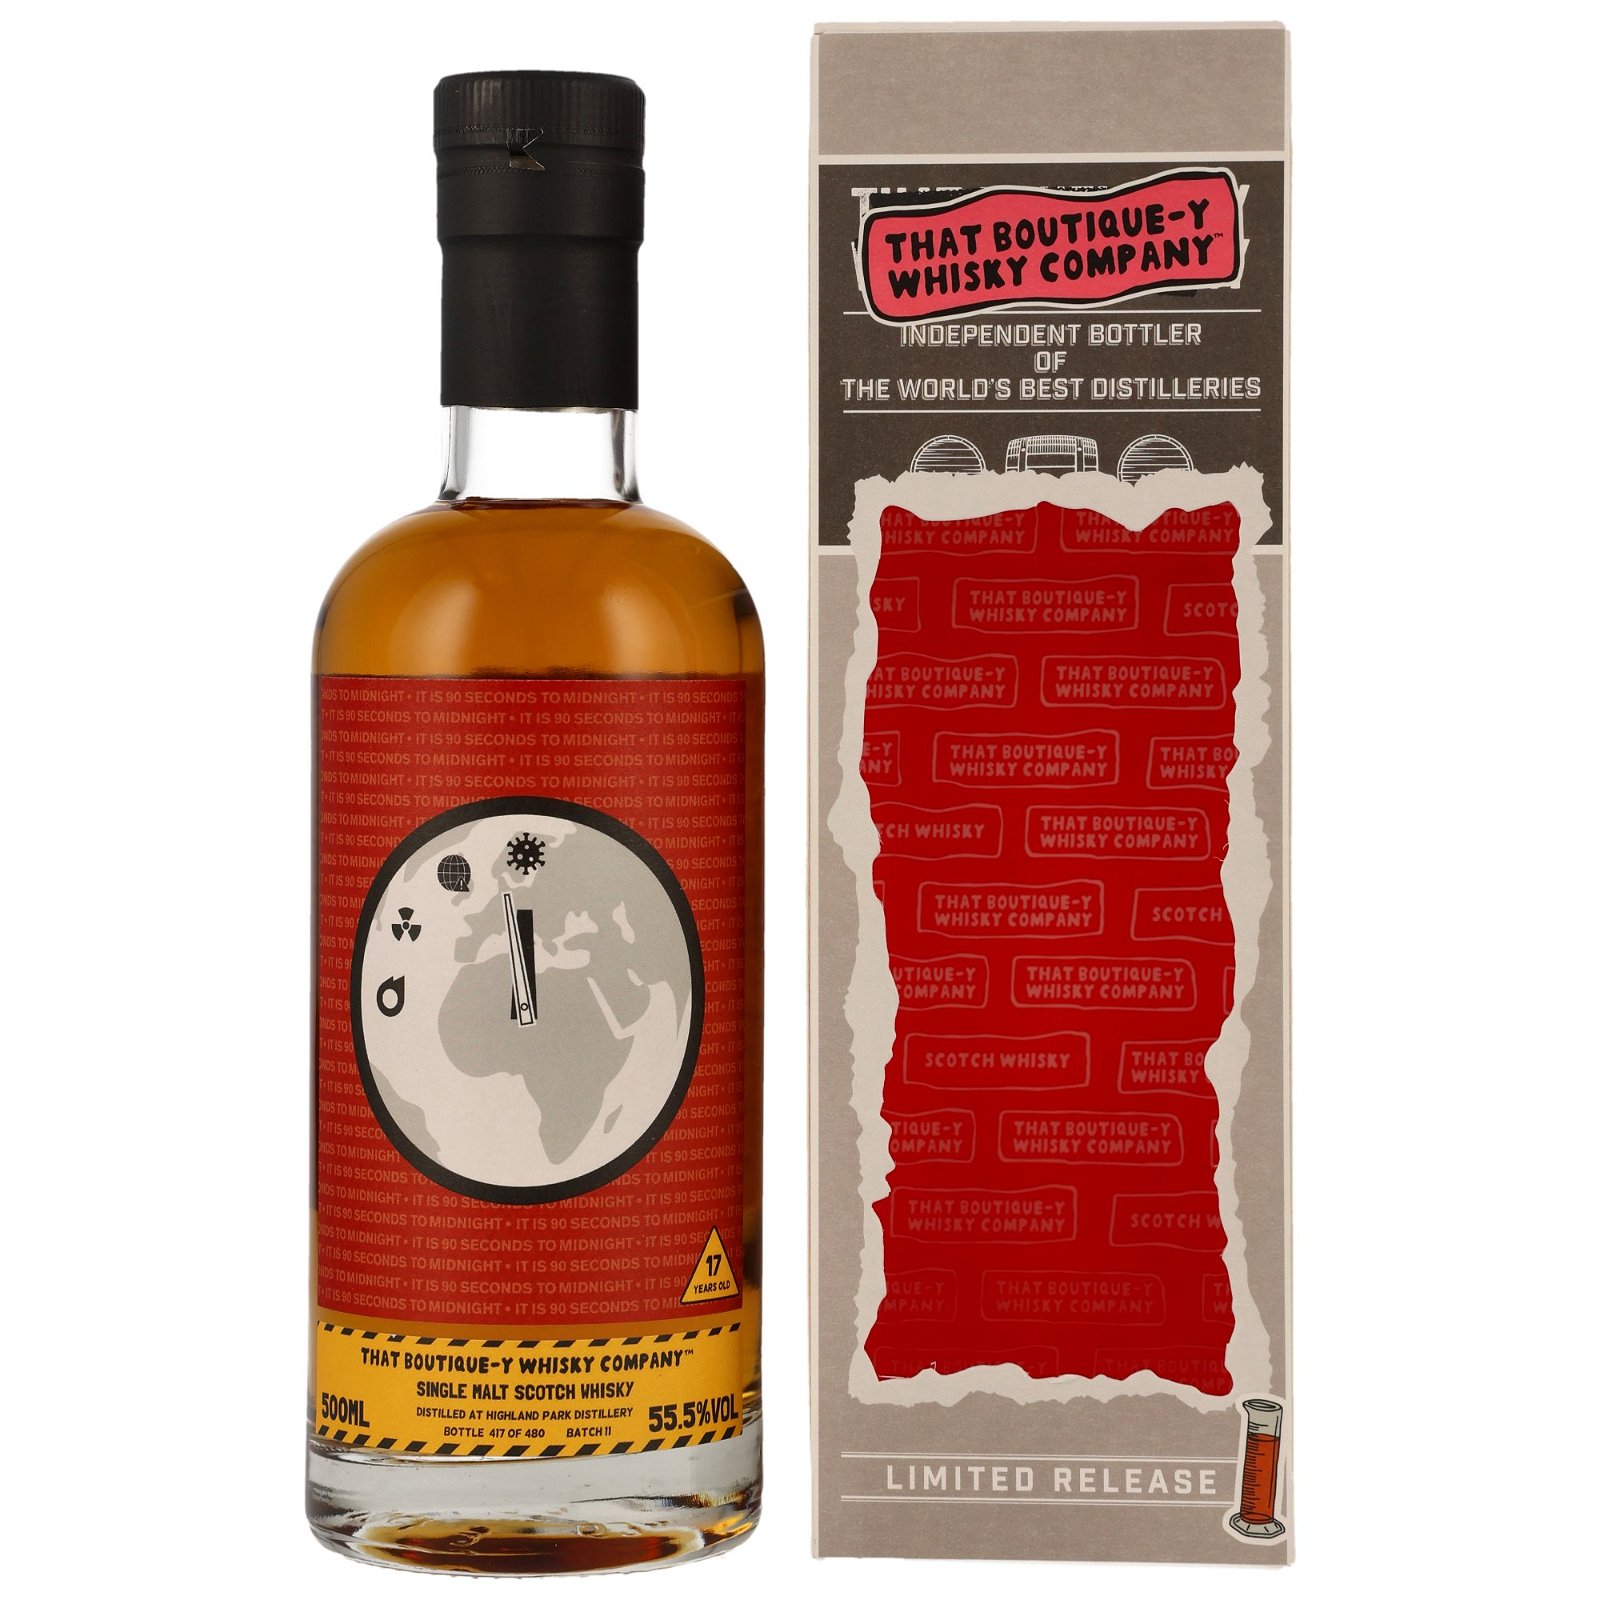 Highland Park 17 Jahre Batch 11 (That Boutique-y Whisky Company)